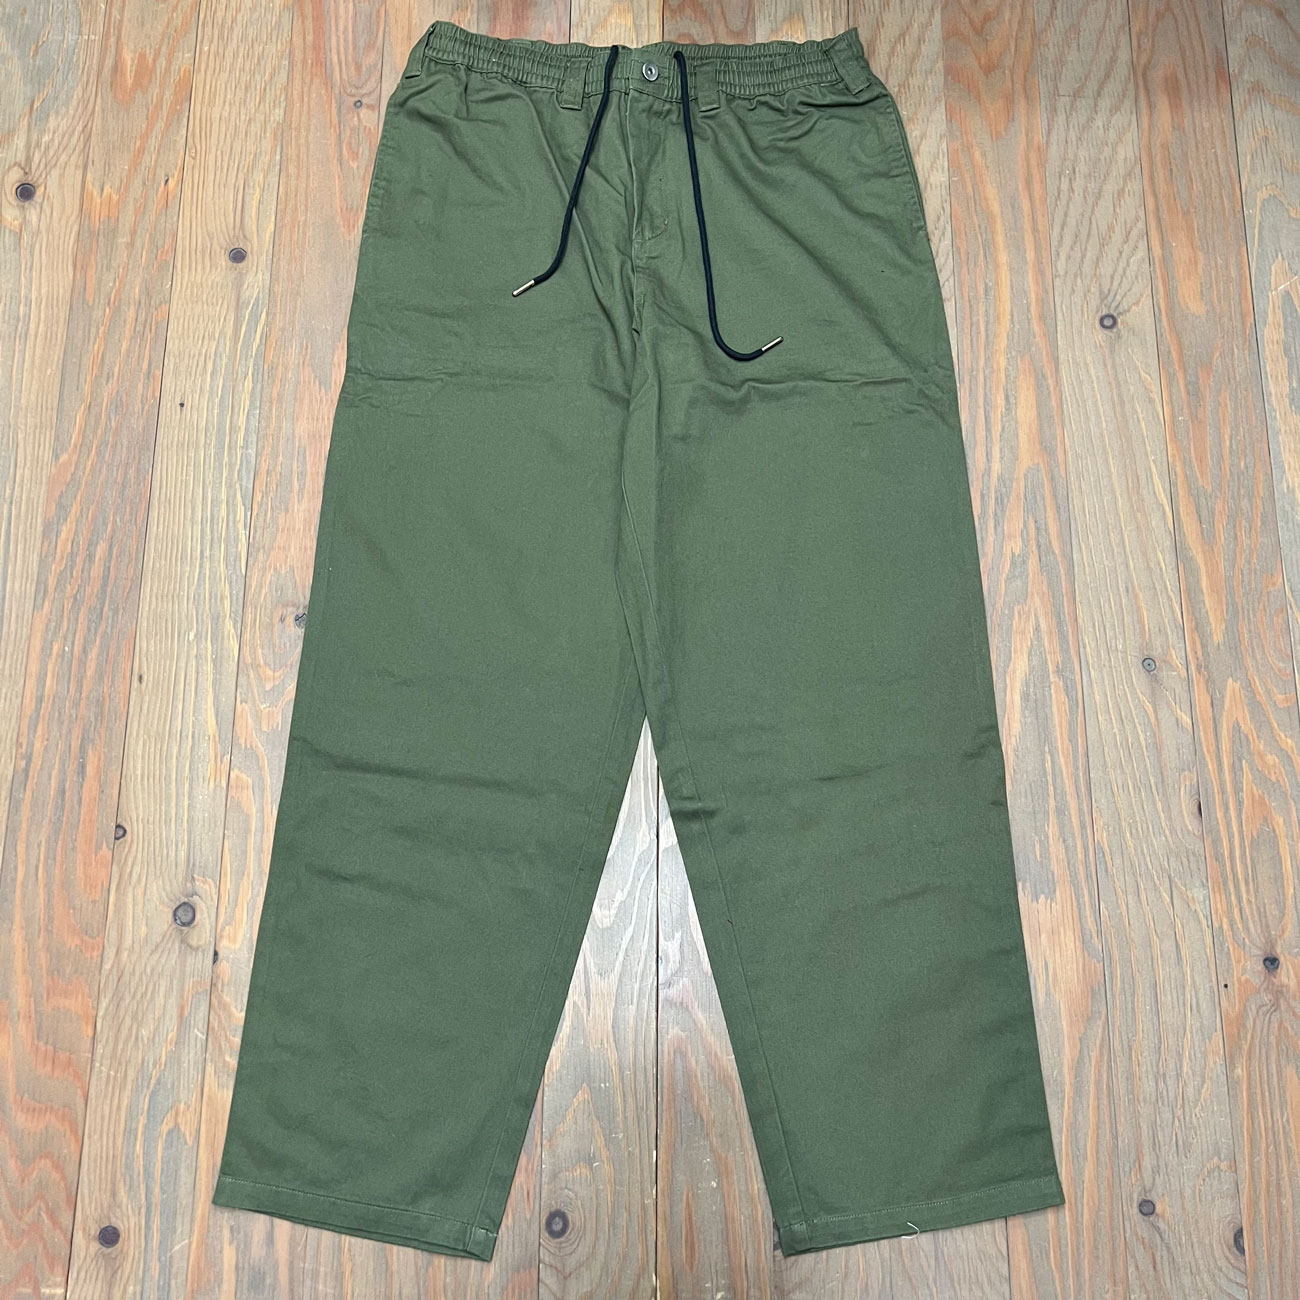 THEORIES STAMP LOUNGE PANTS OLIVE